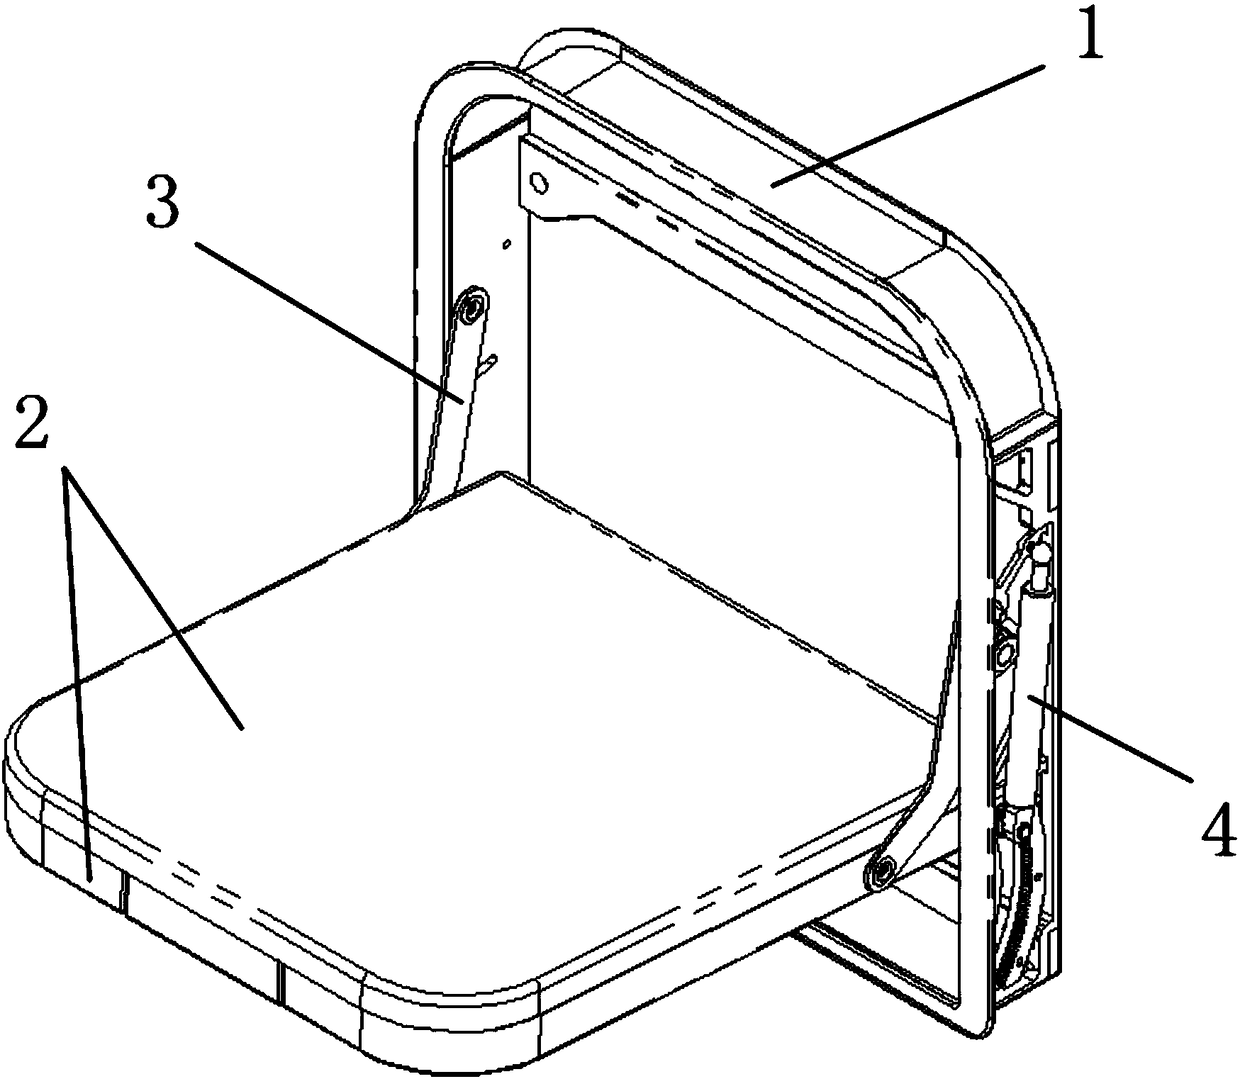 Turnover-rising hidden seat for rail vehicle